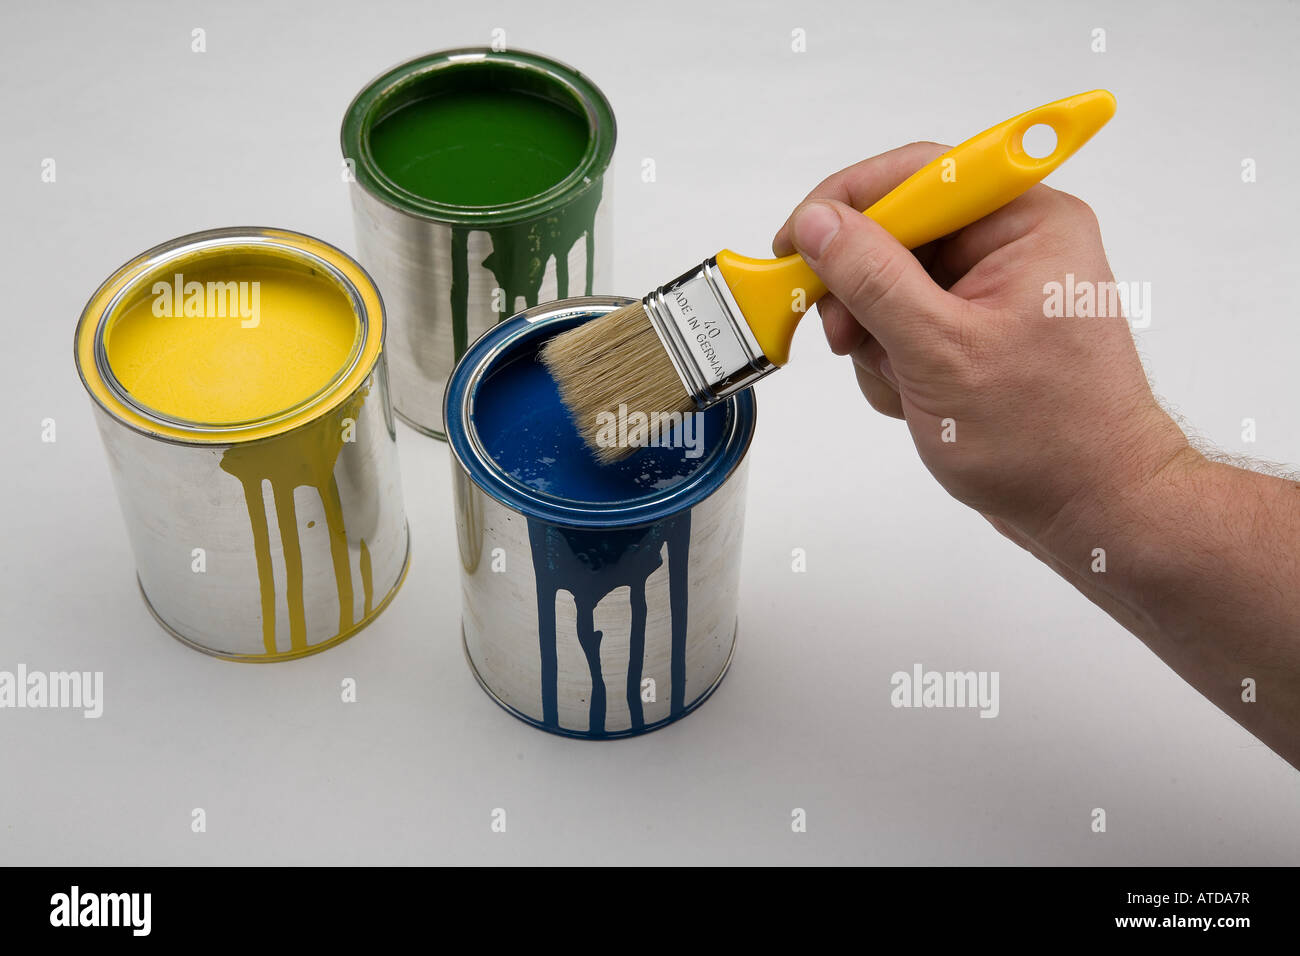 yellow, green and blue color in cans with brush Stock Photo